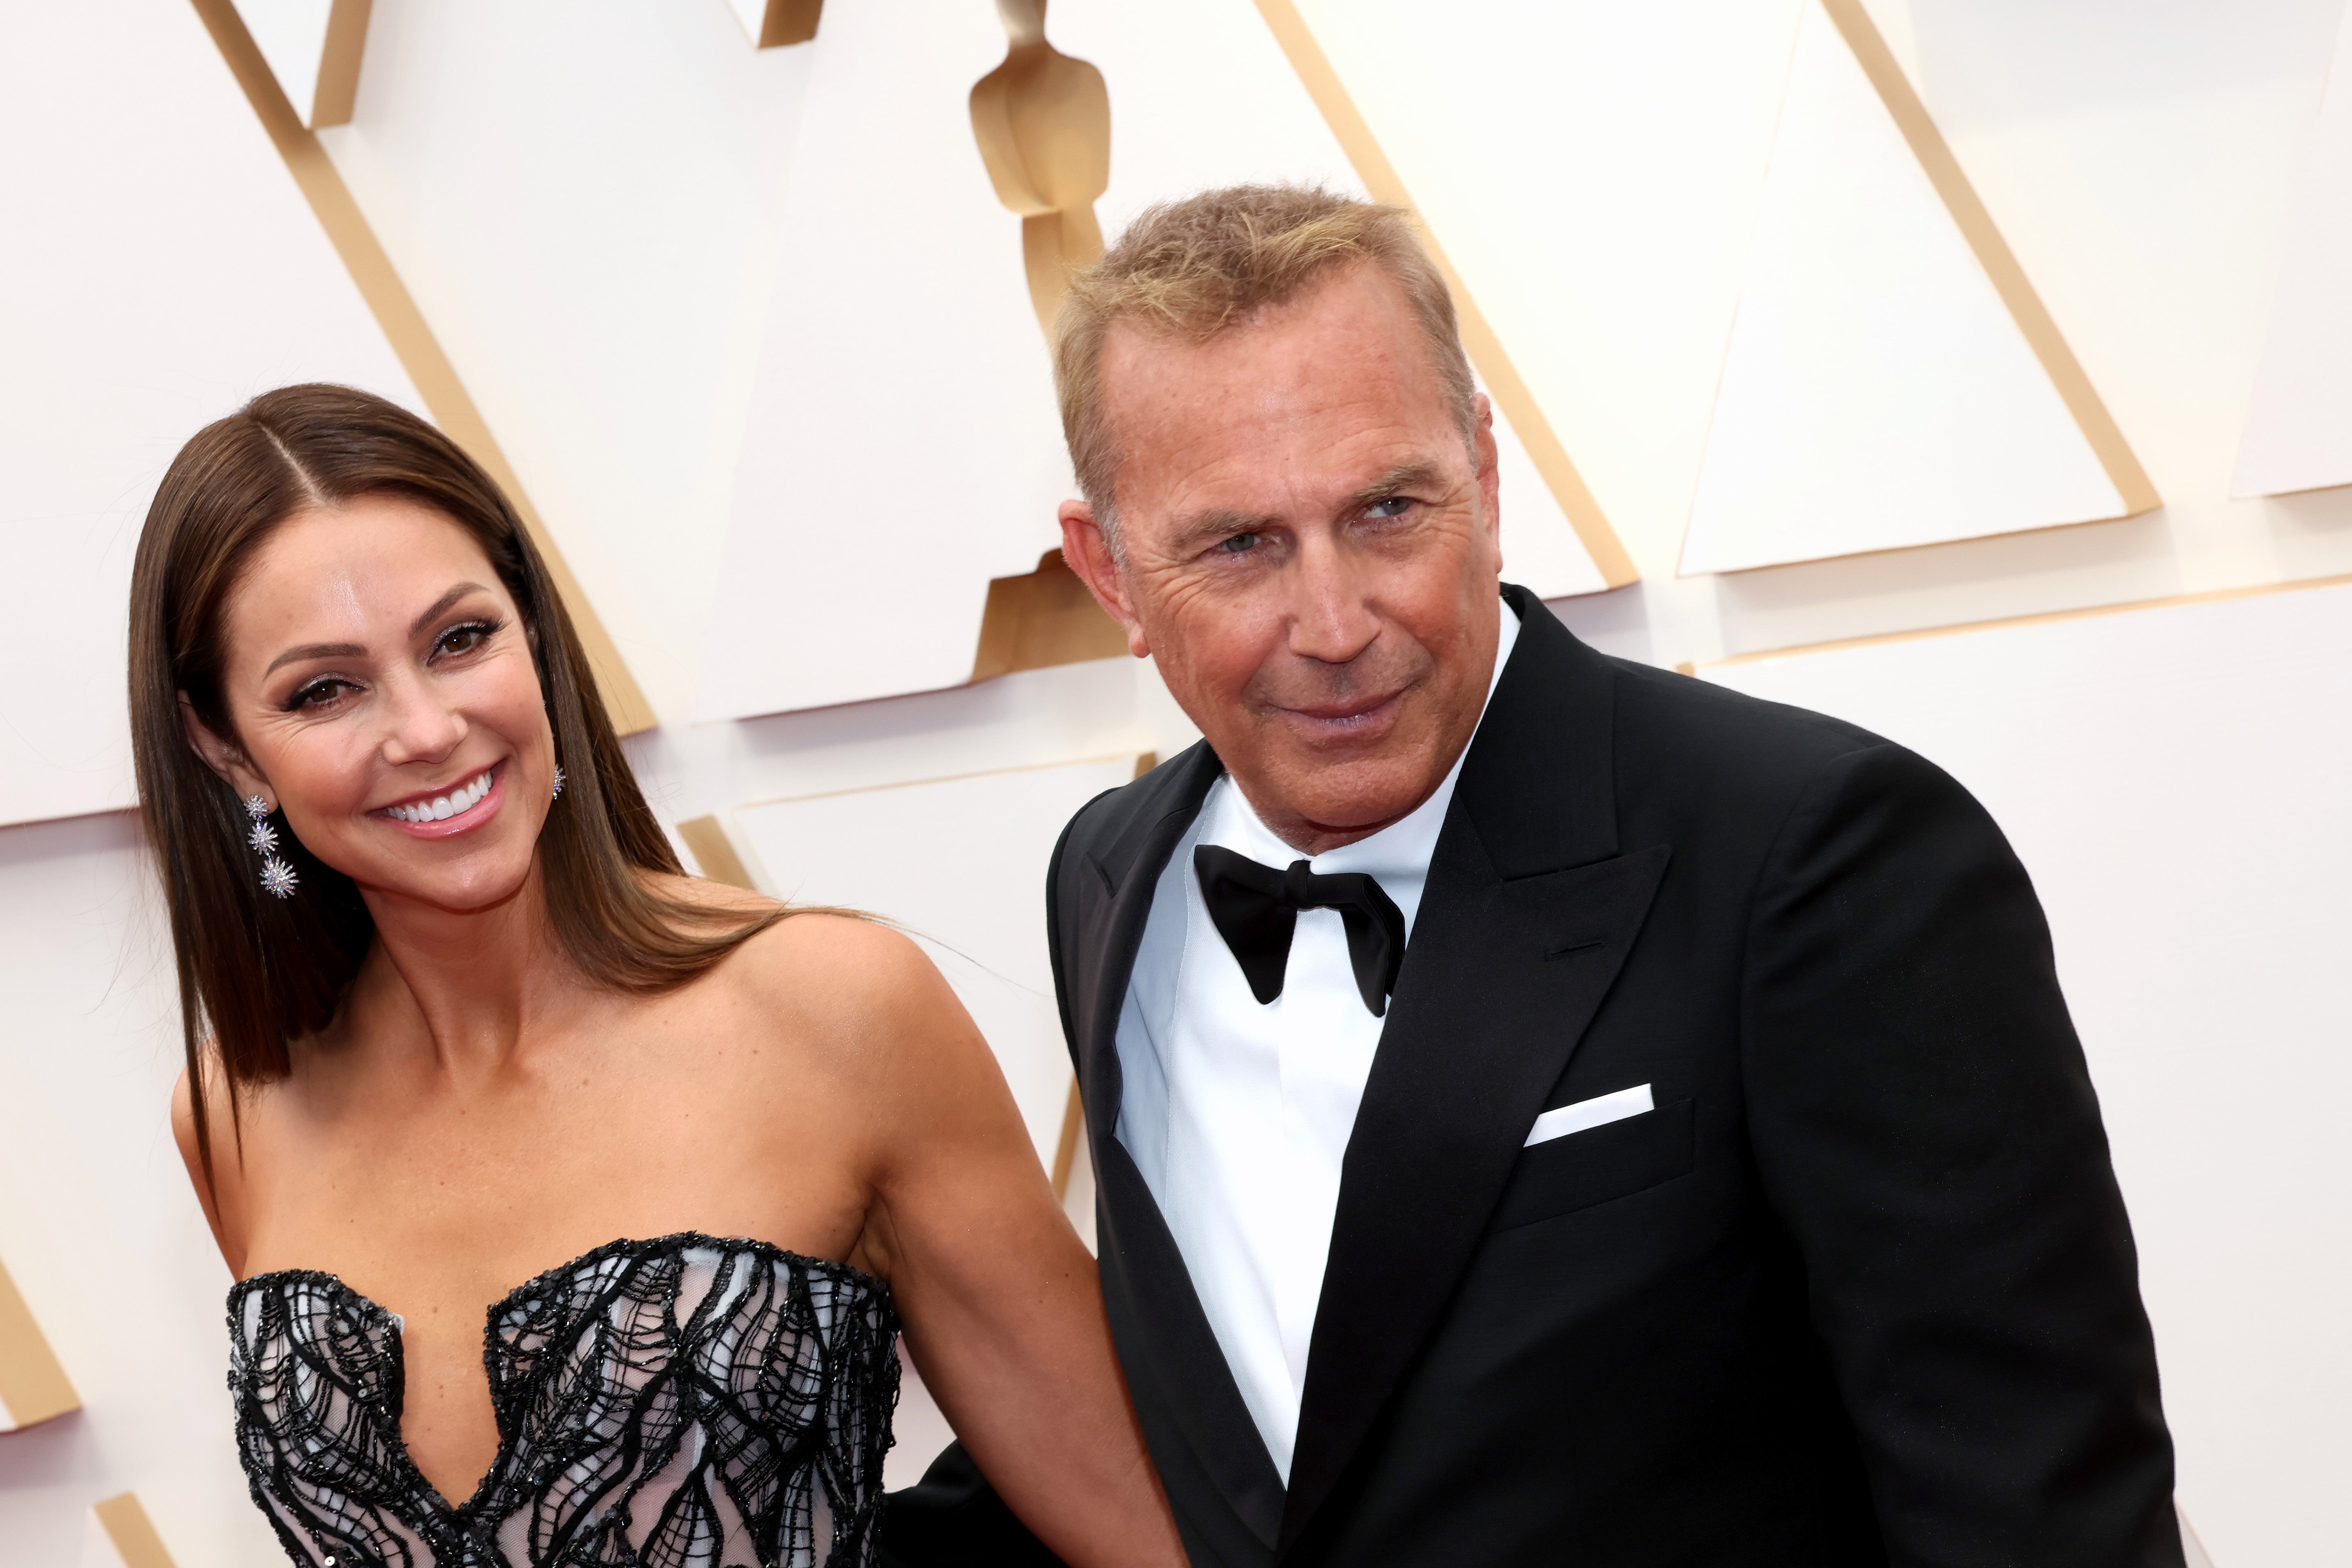 It comes after Costner spoke out about the challenges of his divorce from his former wife Christine Baumgartner